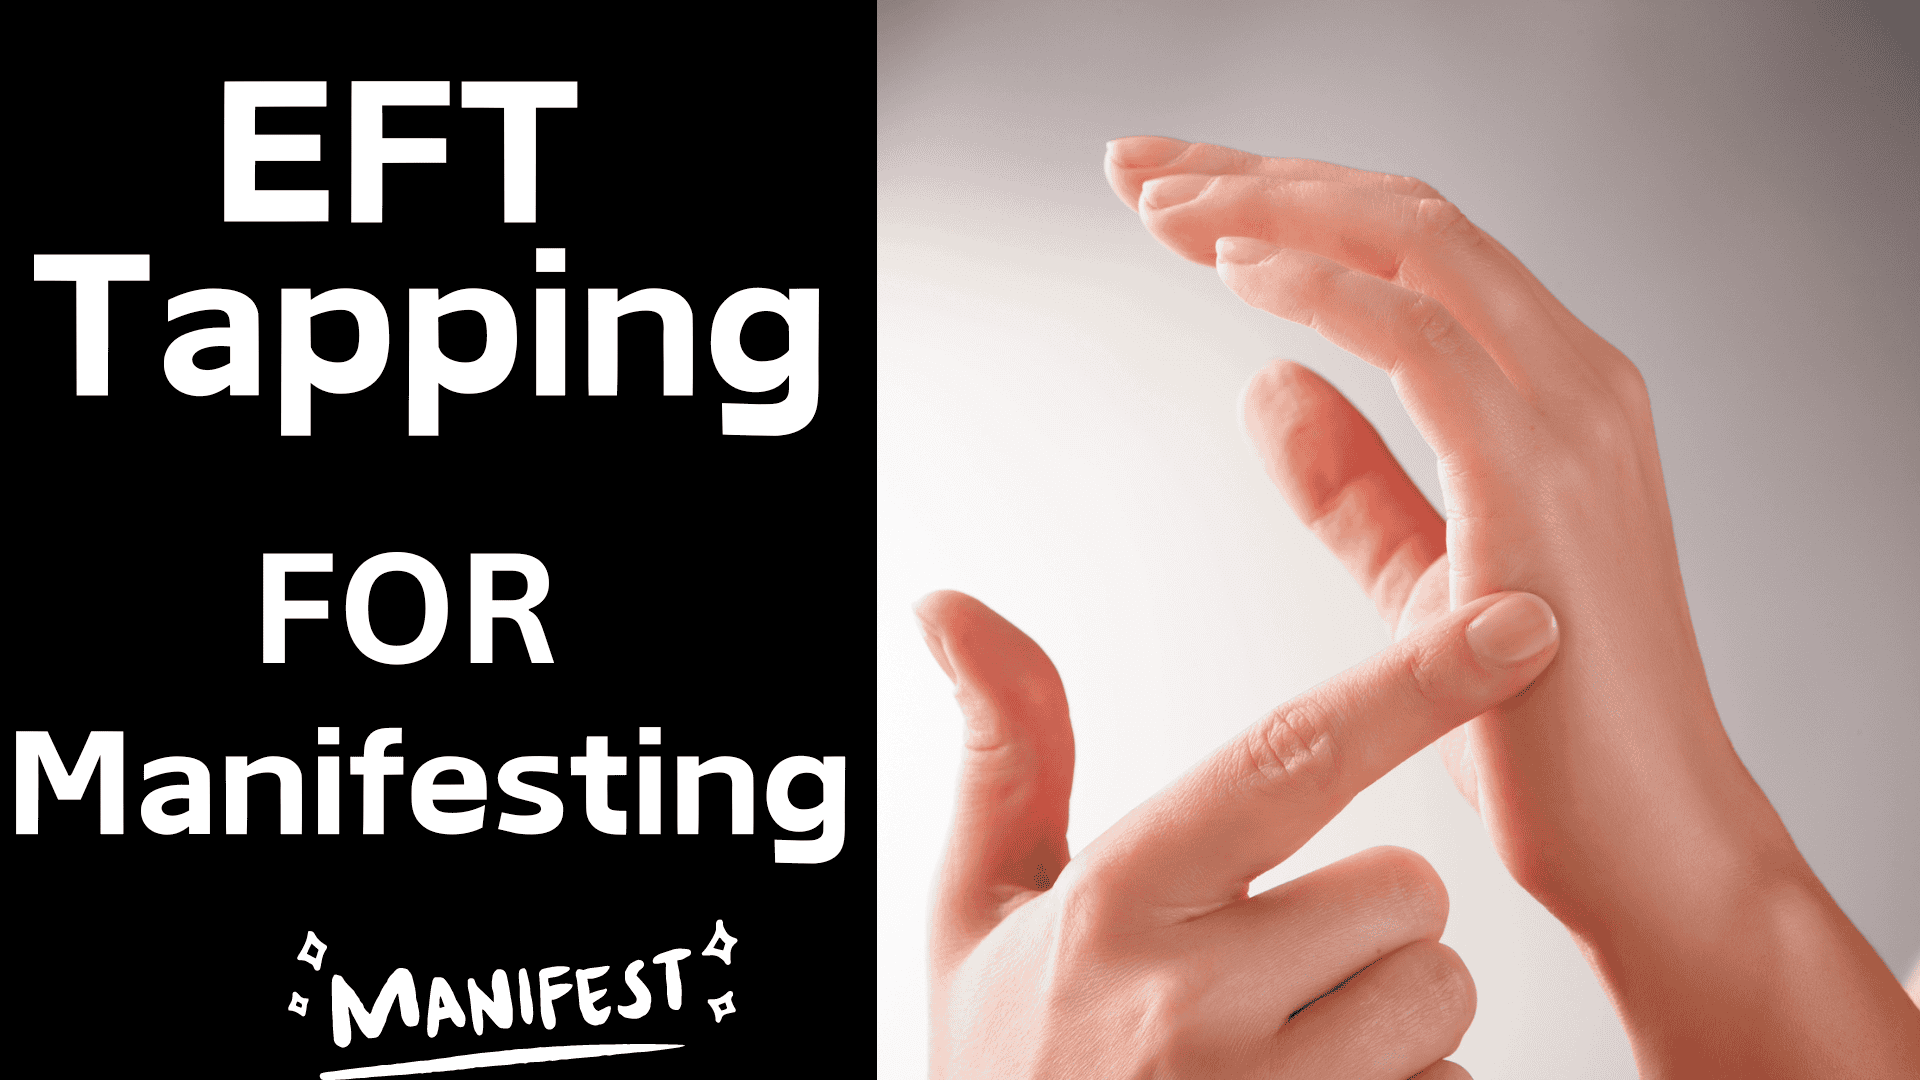 eft tapping for manifesting